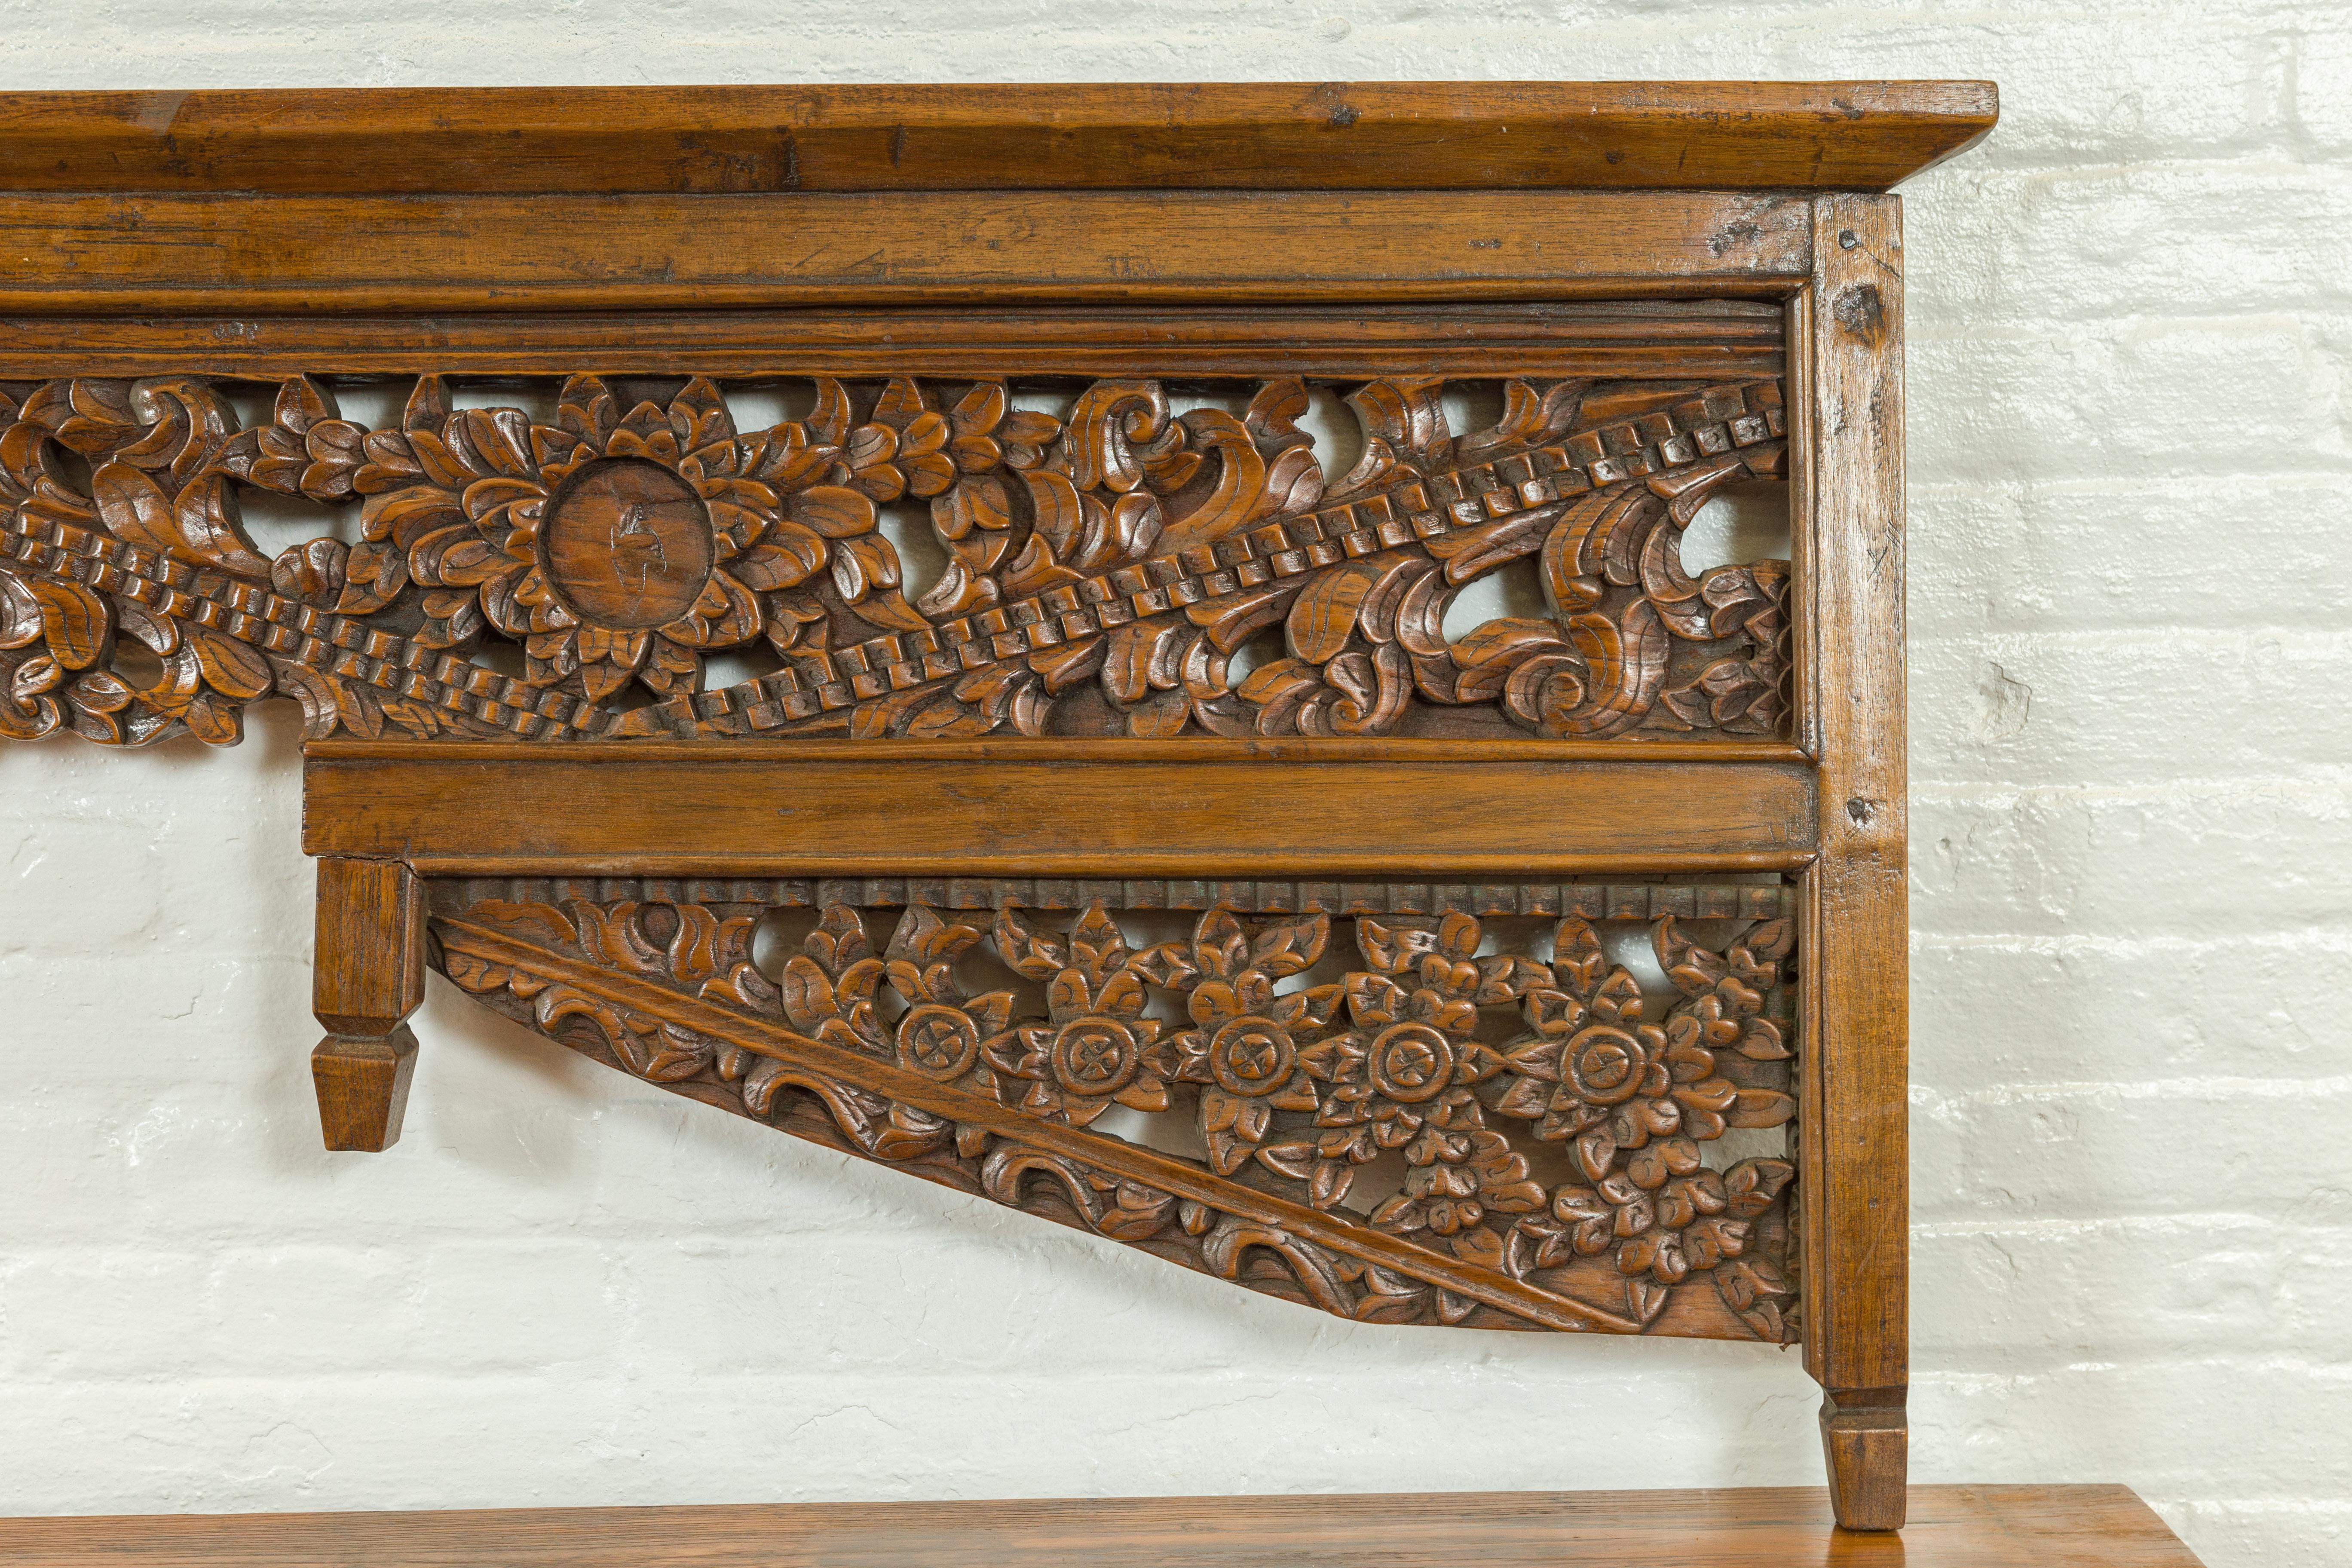 Carved Qing Dynasty Architectural Wooden Temple Panel with Detailed Floral Carvings For Sale